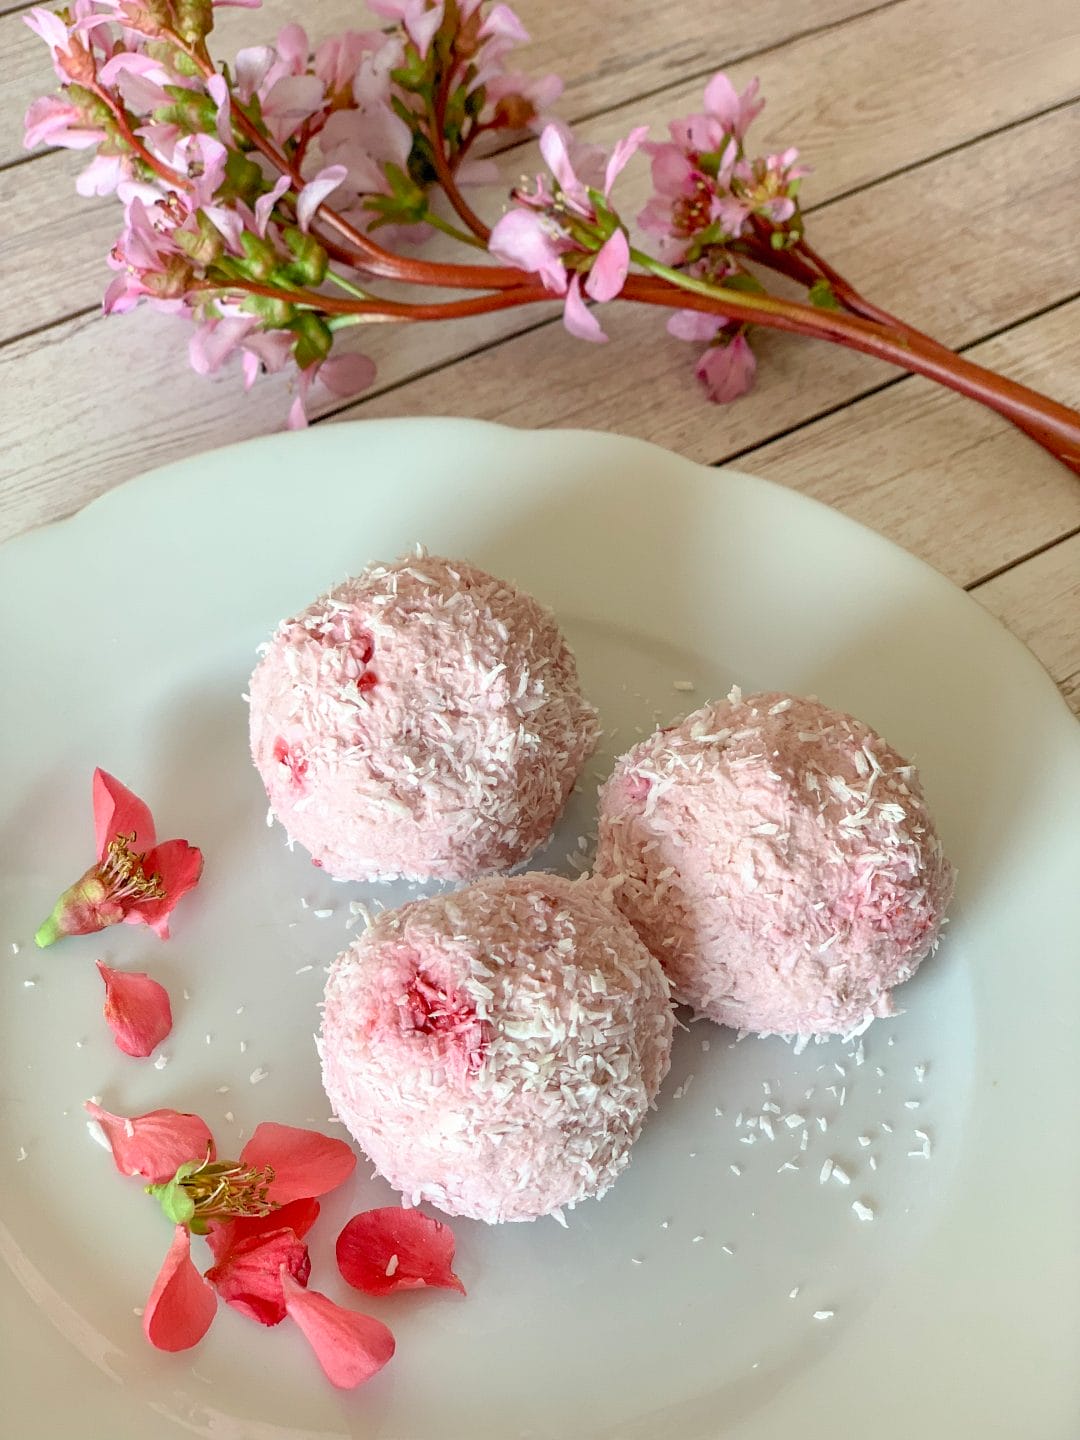 Picture of keto fat bombs with raspberries and mascarpone